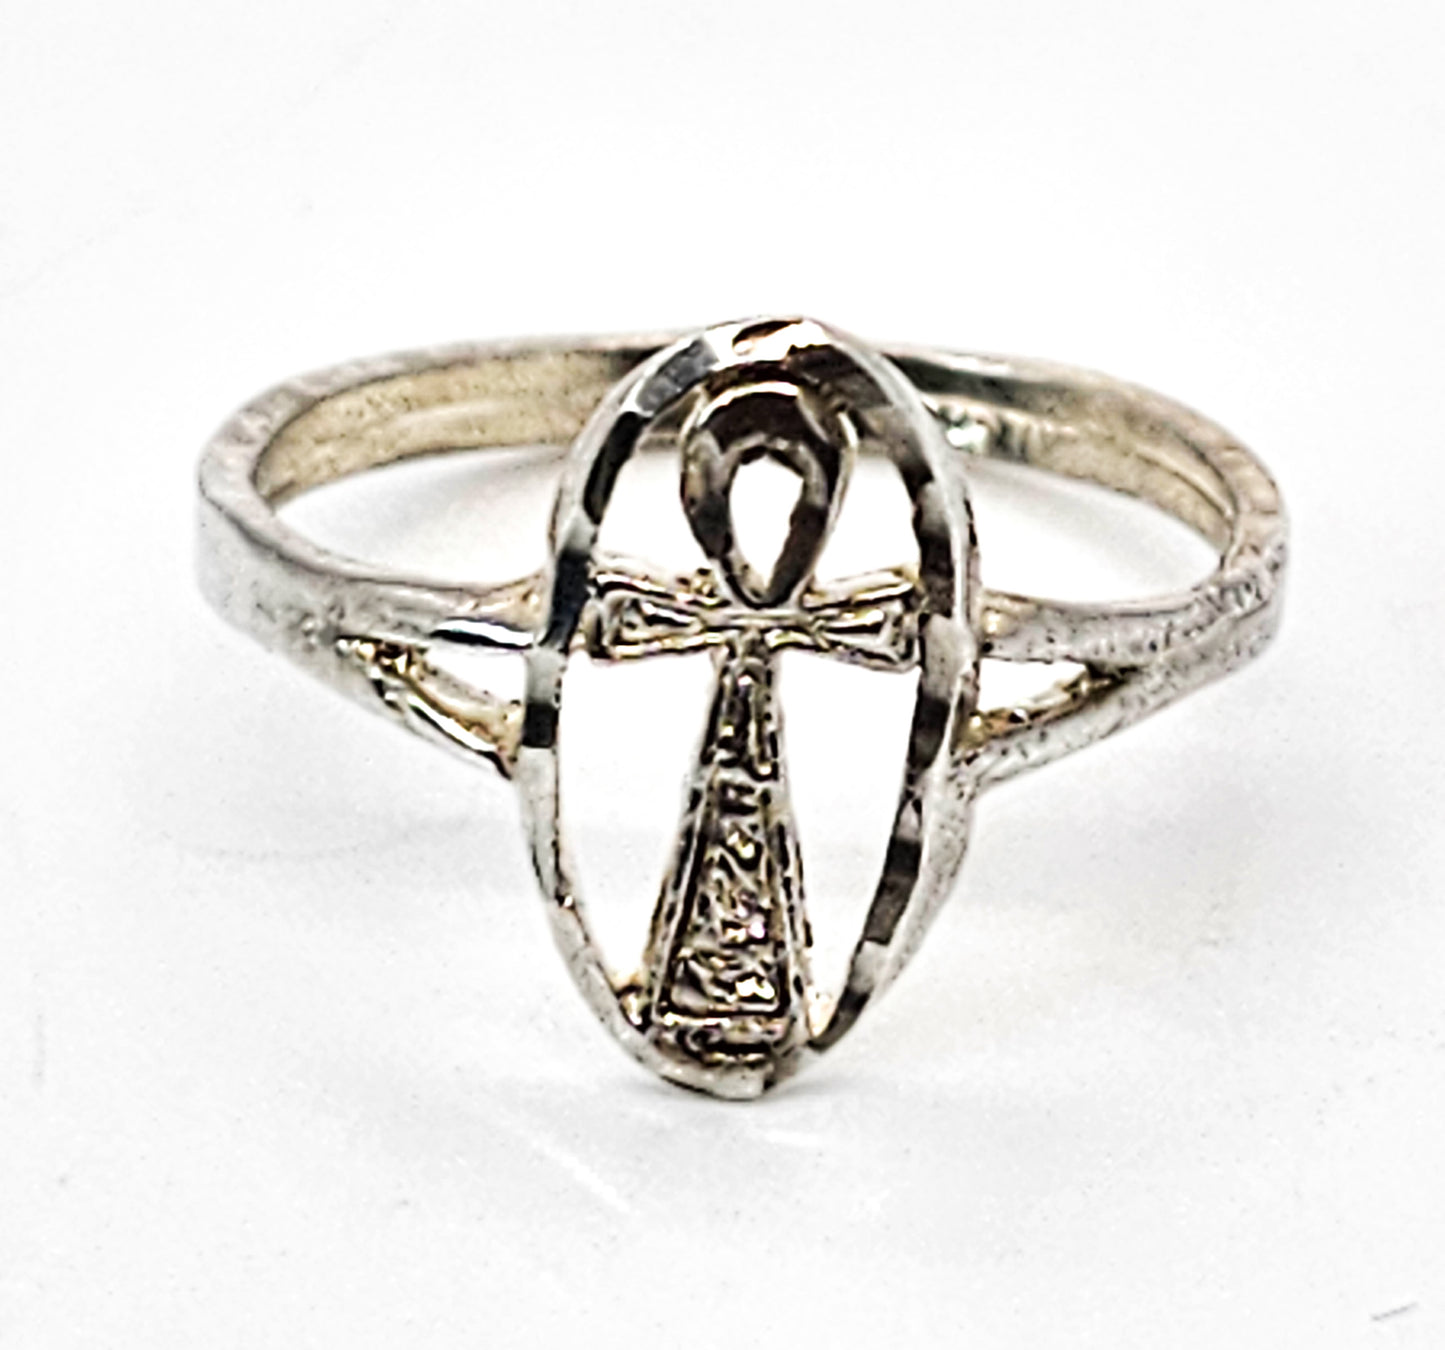 Ankh Key of Life Egyptian Revival vintage sterling silver open work ring size 7.5